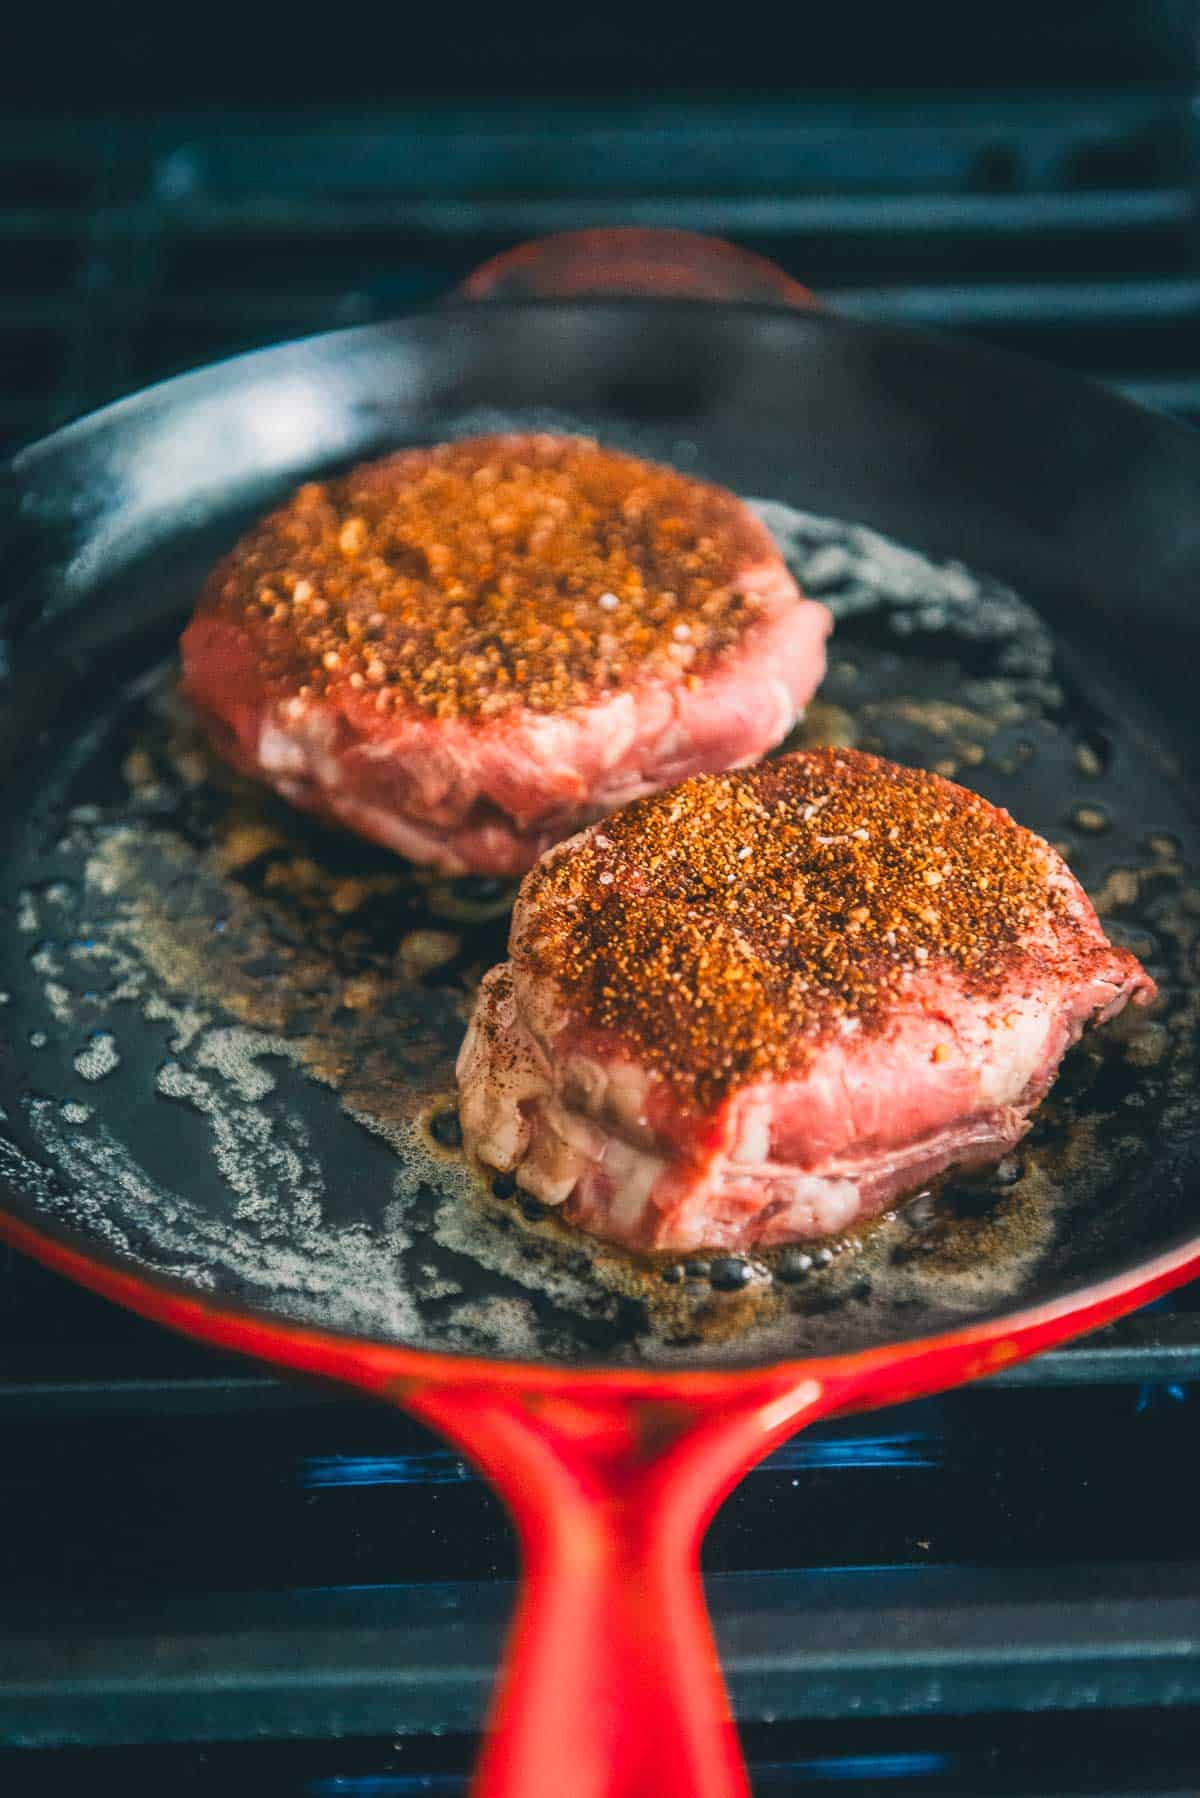 Image of sous vide steaks in cast iron, coated in spices to sear.